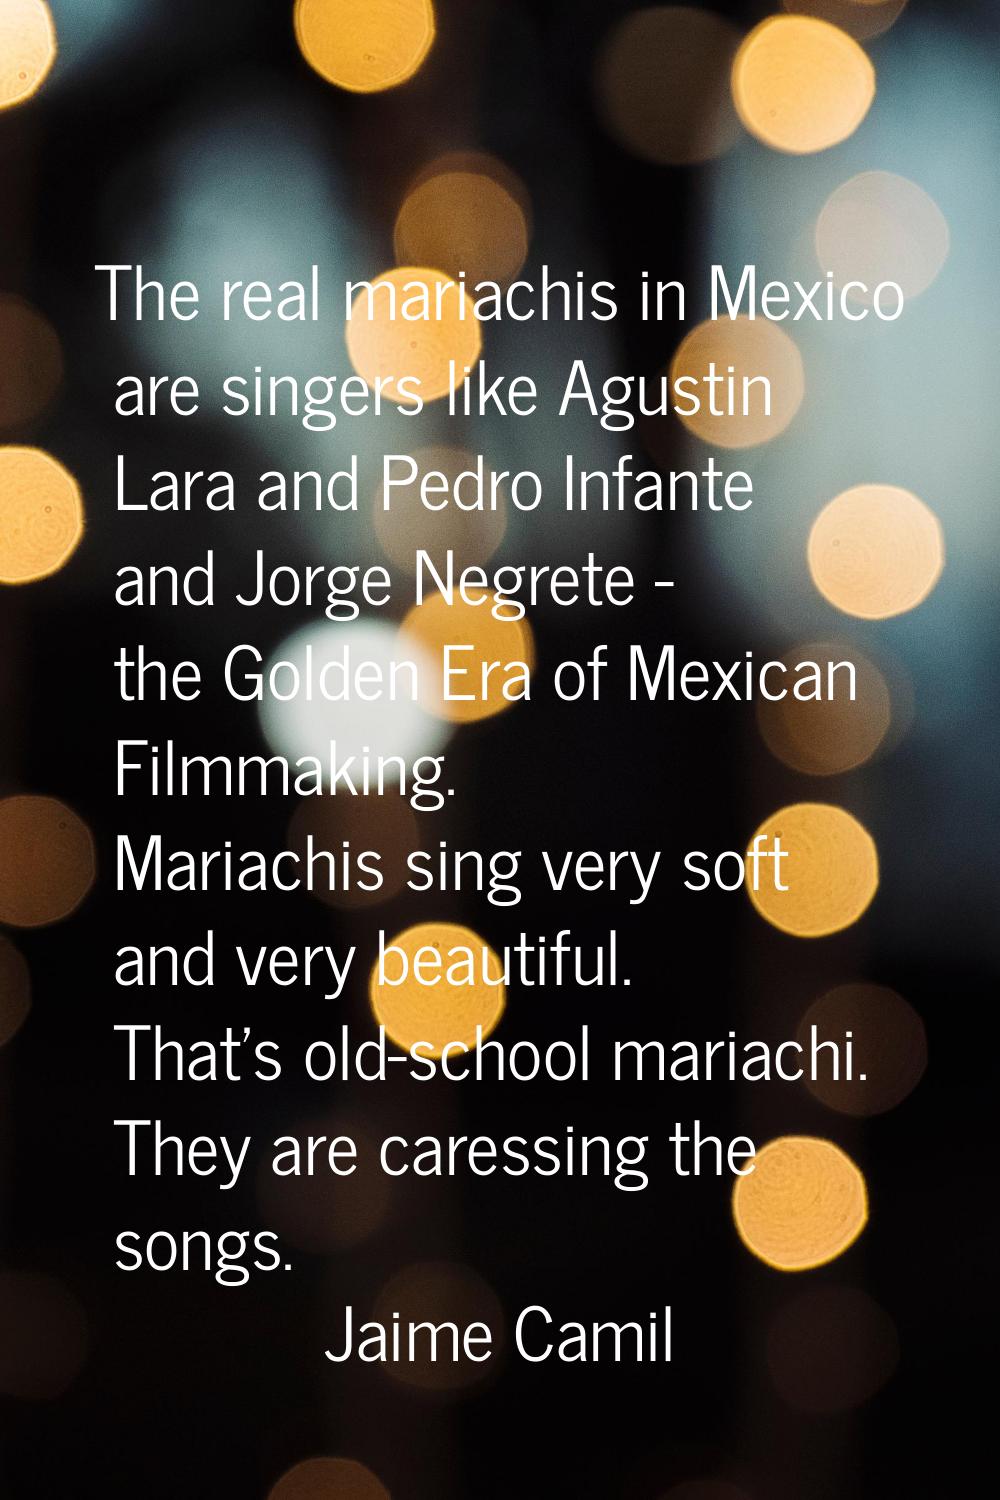 The real mariachis in Mexico are singers like Agustin Lara and Pedro Infante and Jorge Negrete - th